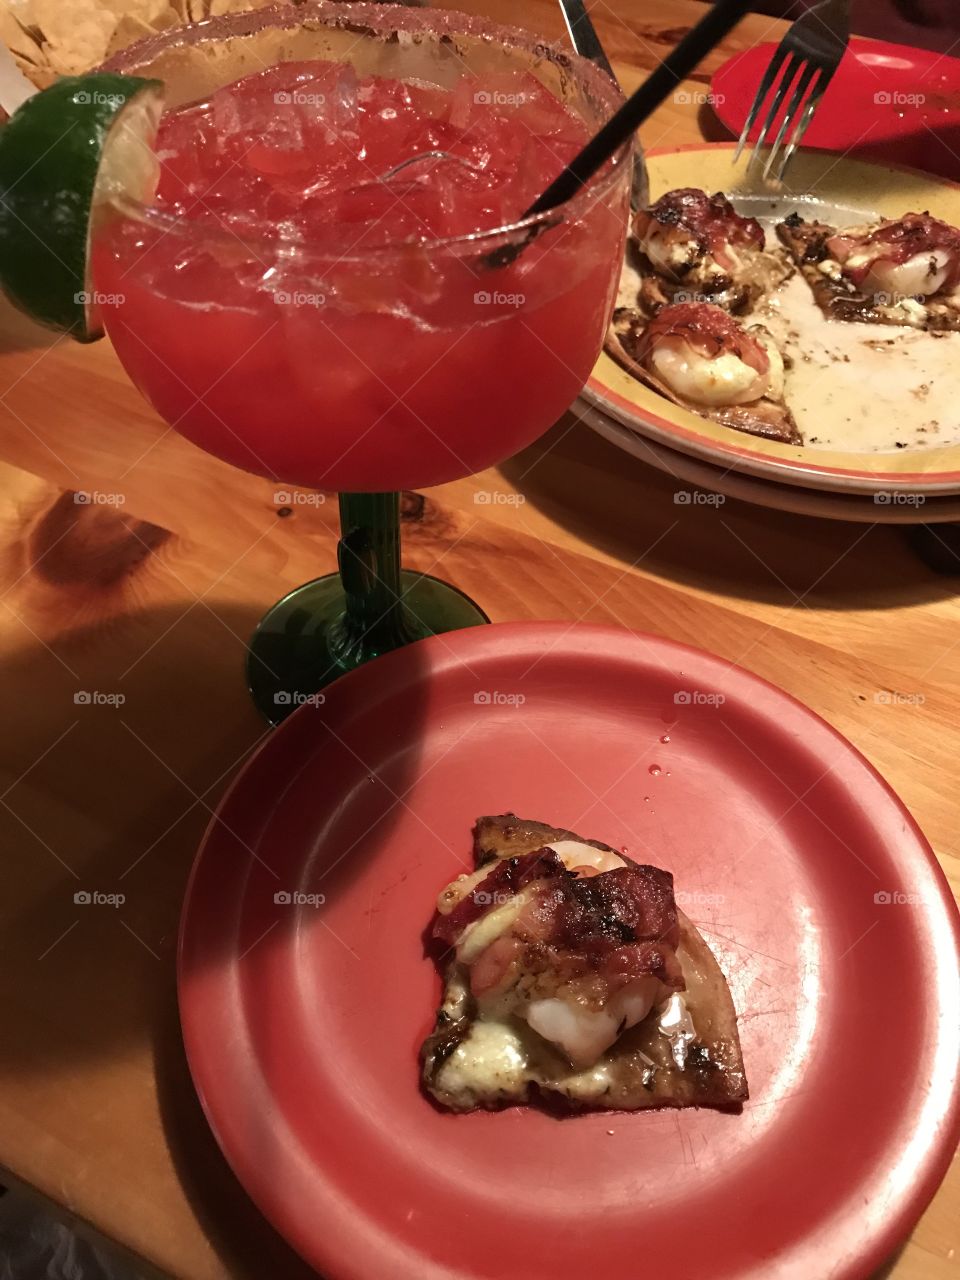 Margarita and shrimp appetizer from the Mexican restaurant. 